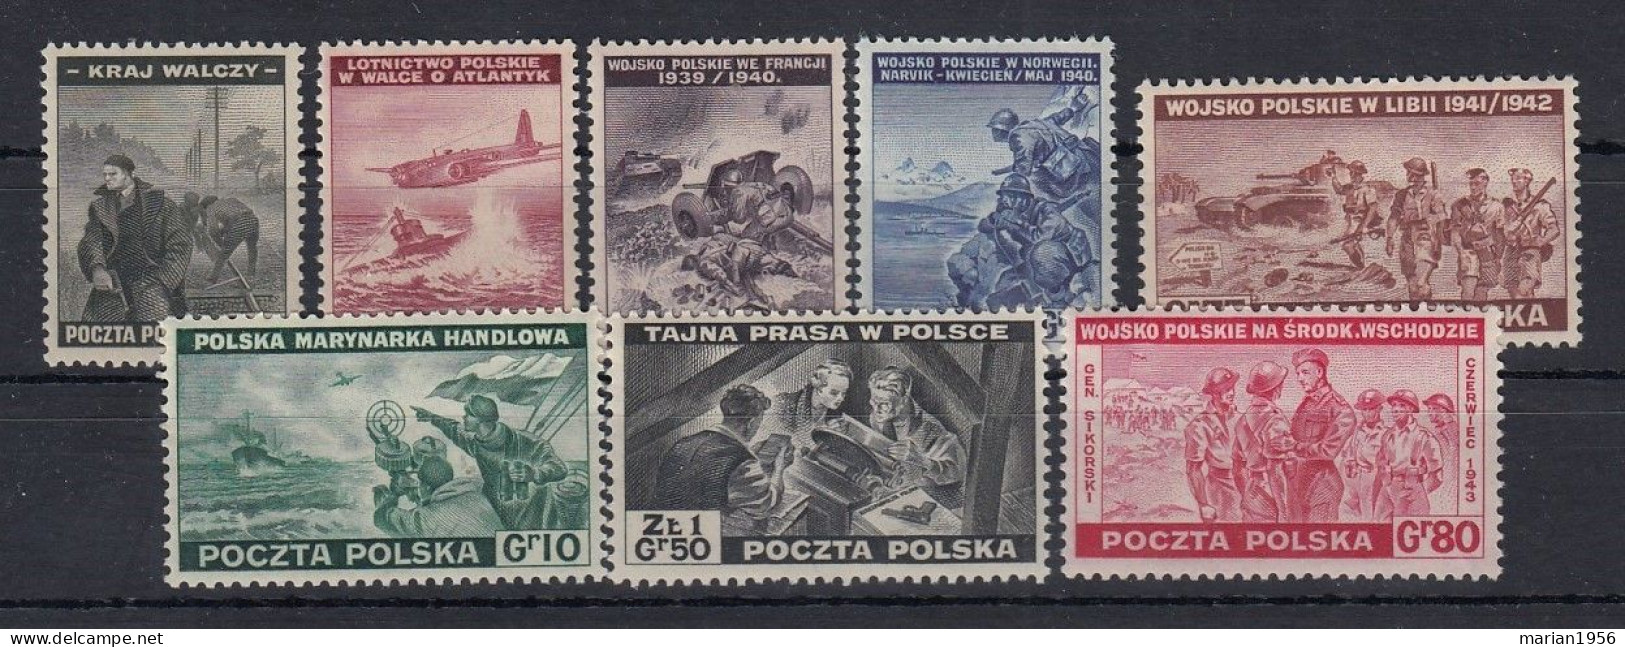 Pologne 1943 - Guerre - WWII - GOVERNMENT In EXILE (LONDON) - ARMEE POLONAISE -Mich. 368/75 - MNH - Governo Di Londra (esilio)